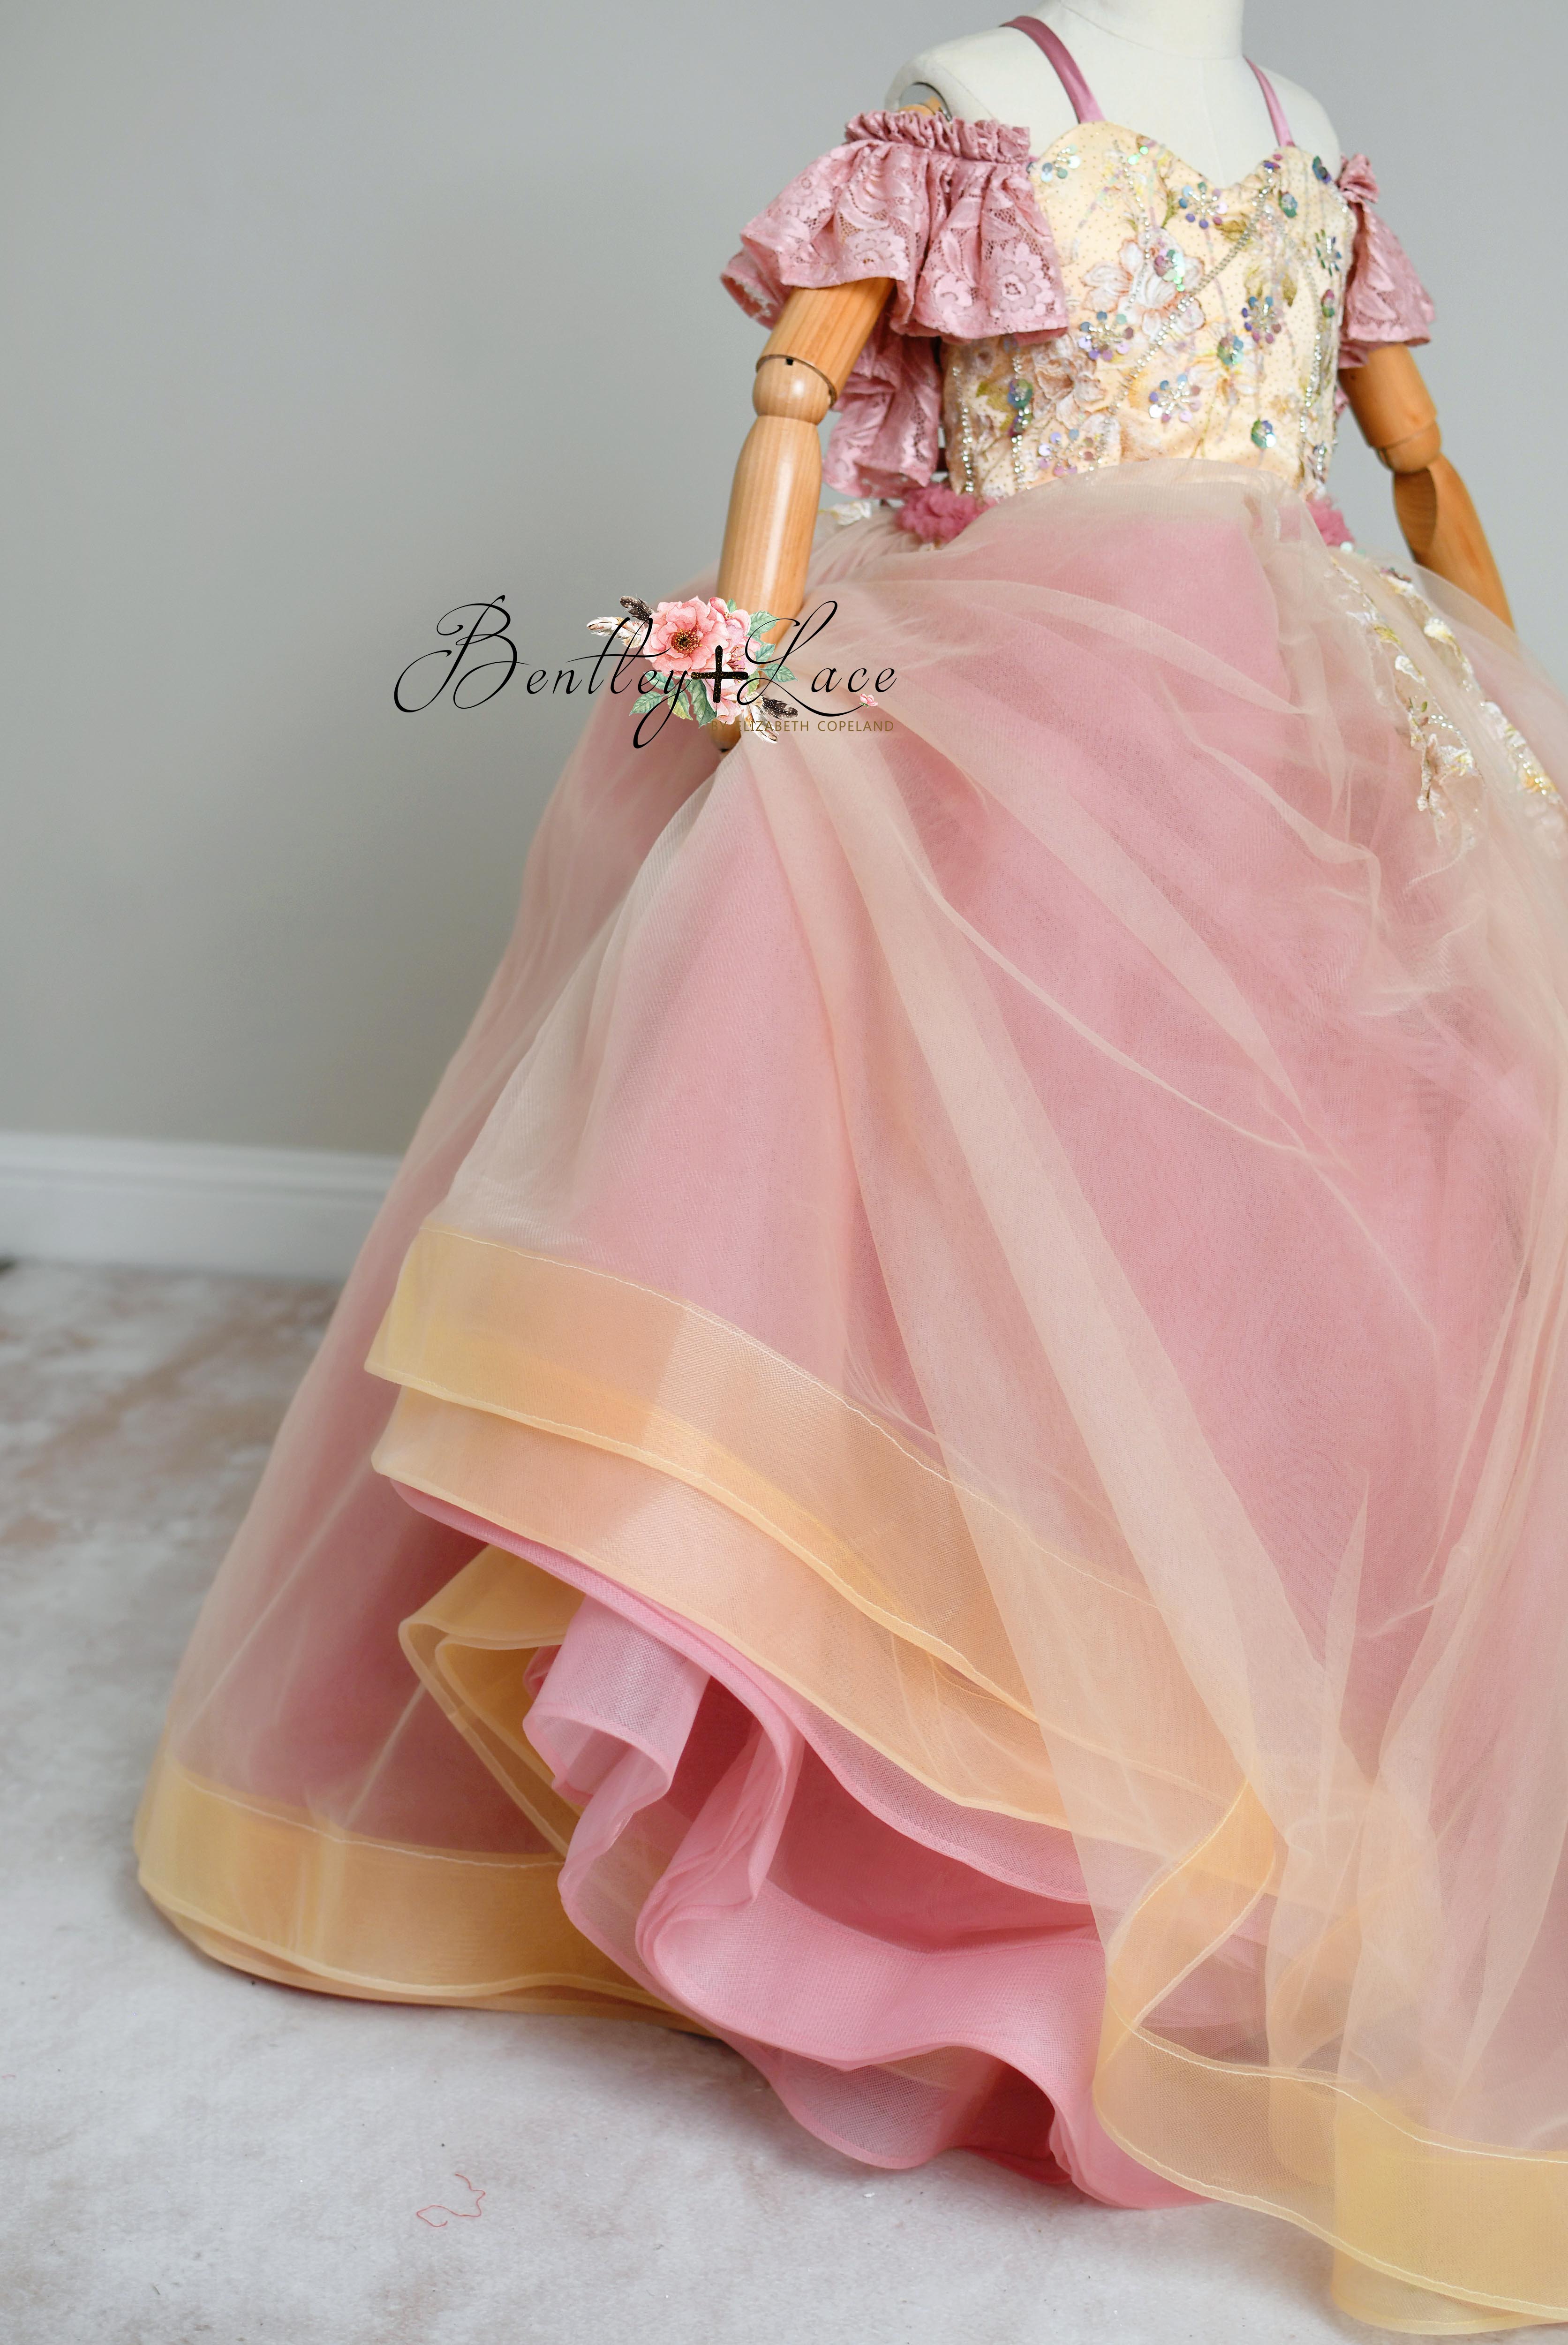 "Sunshine Serenade" Floor length  Editorial Dress, Couture Gown, Special Occasion Dress